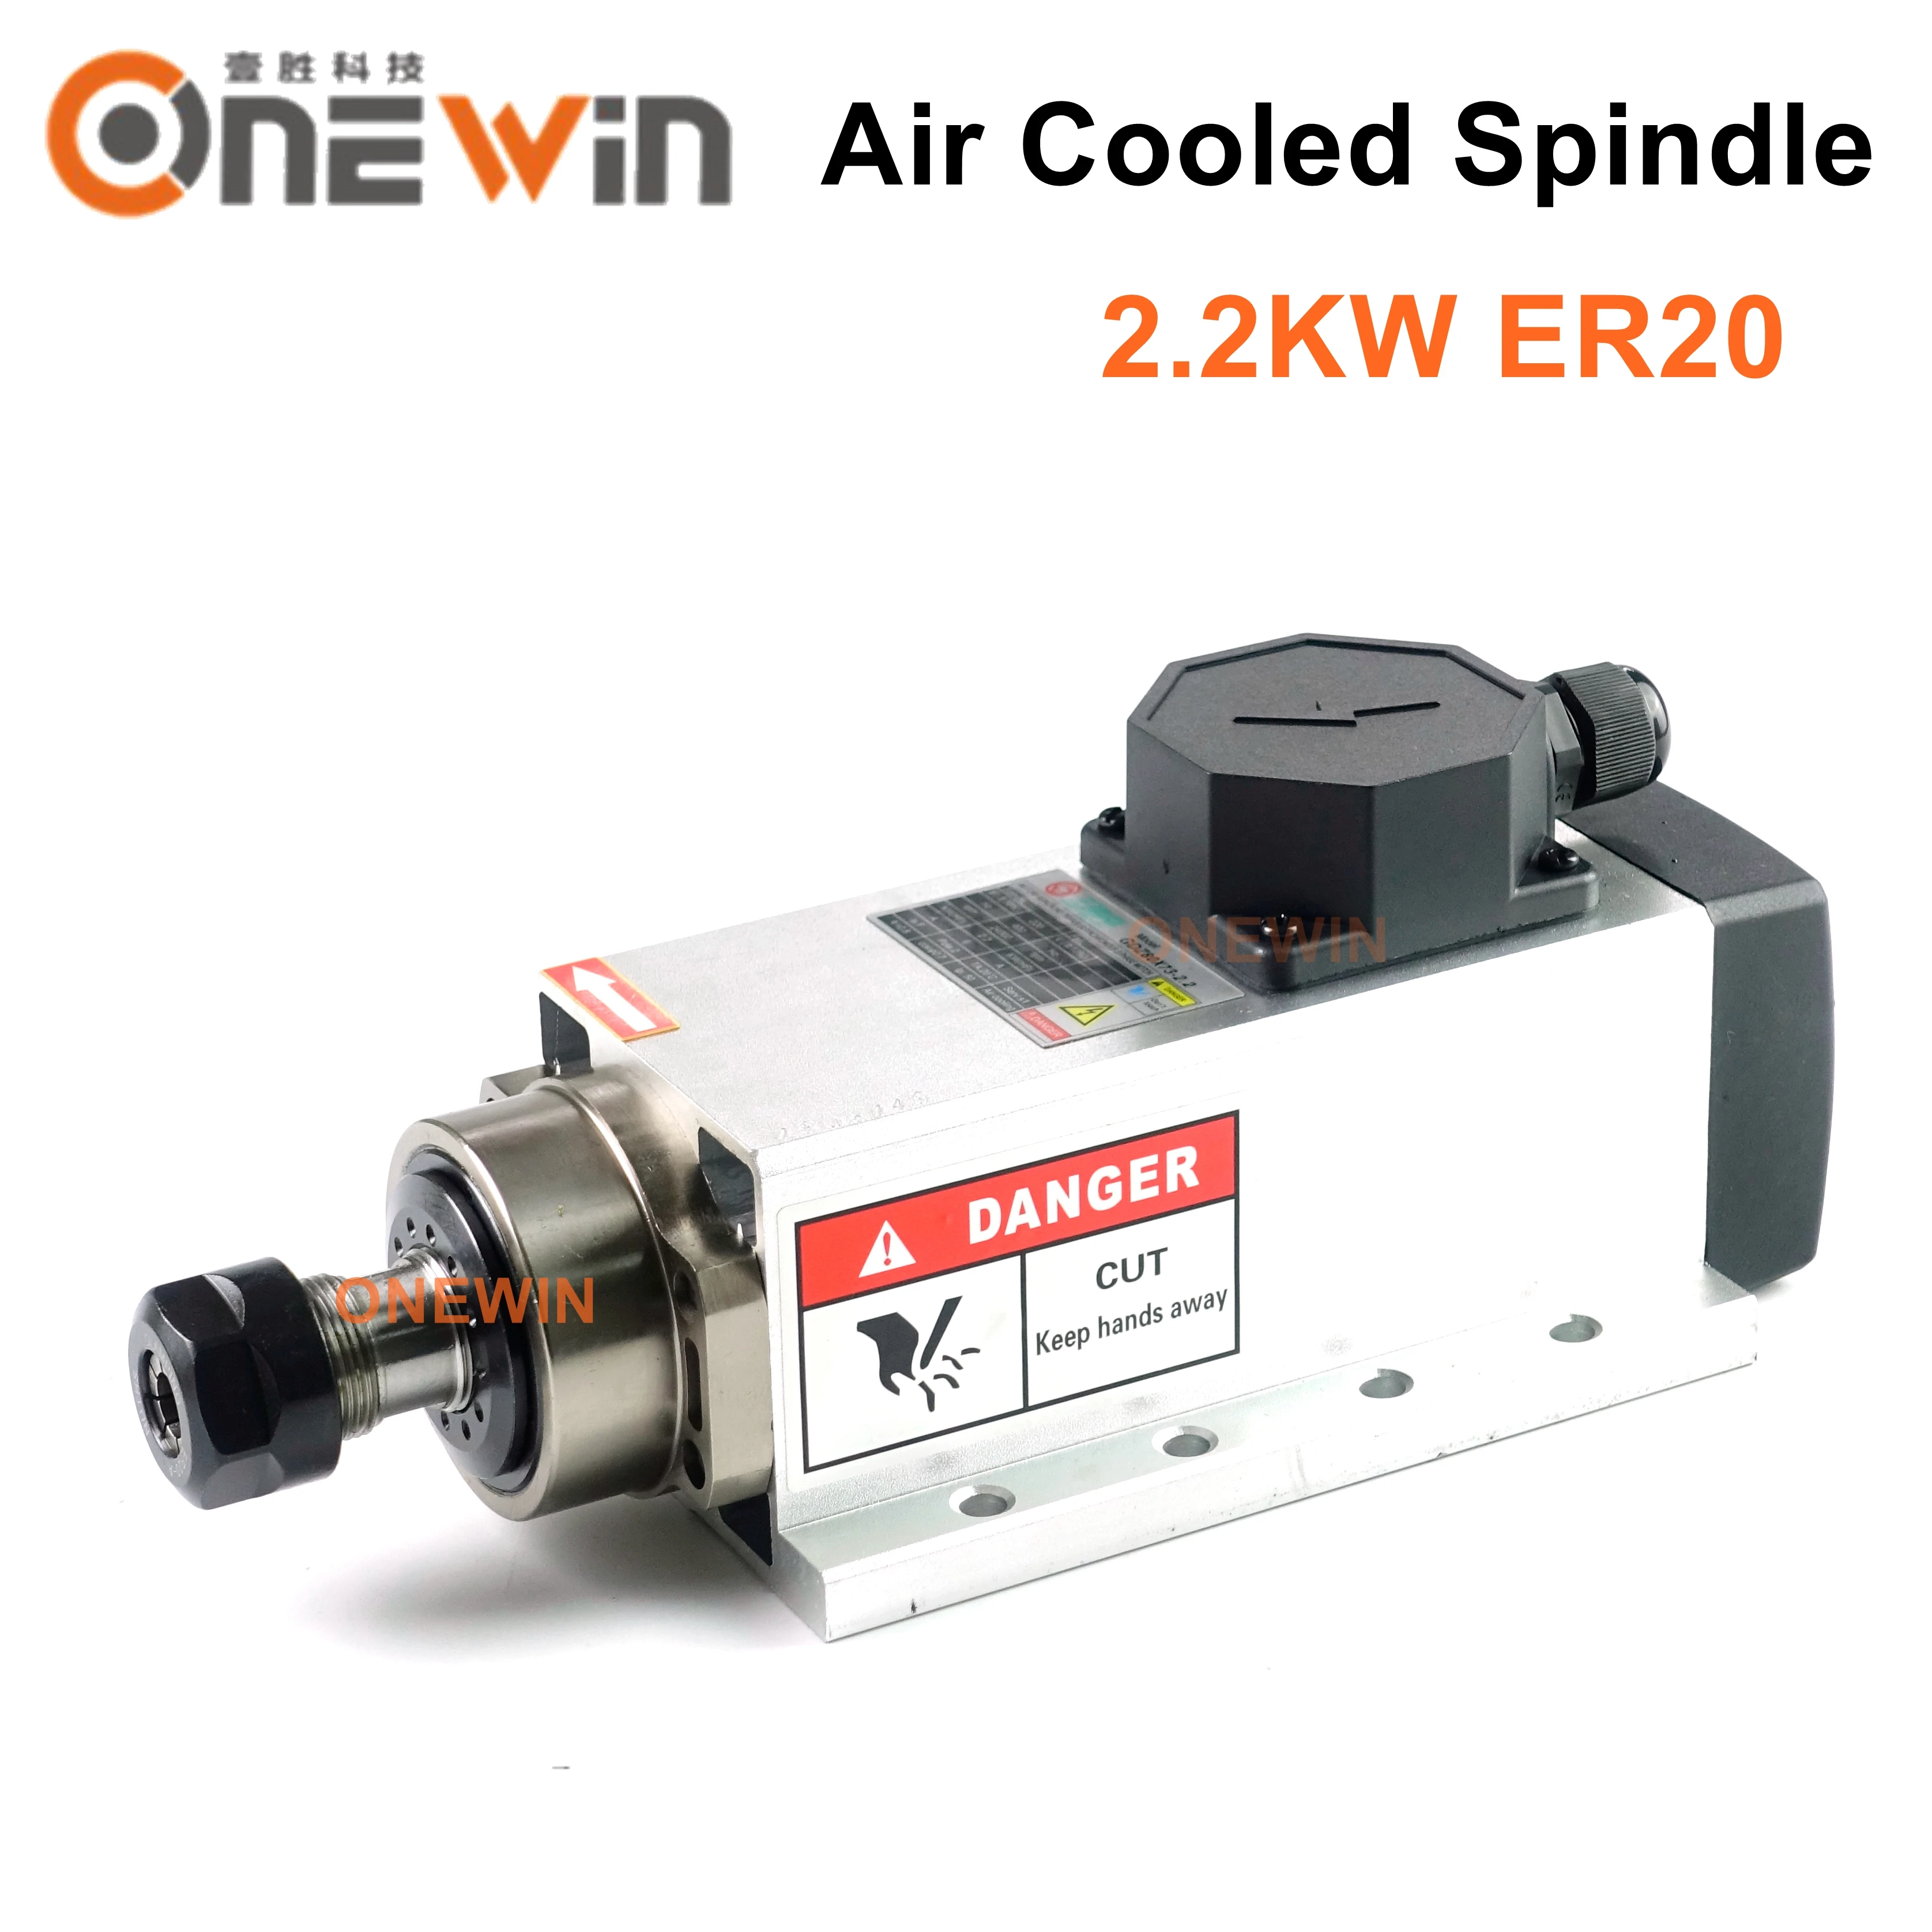 Square 2.2KW ER20 Air Cooled Spindle Motor 4 Bearing 24000rpm for CNC Router〖US〗 